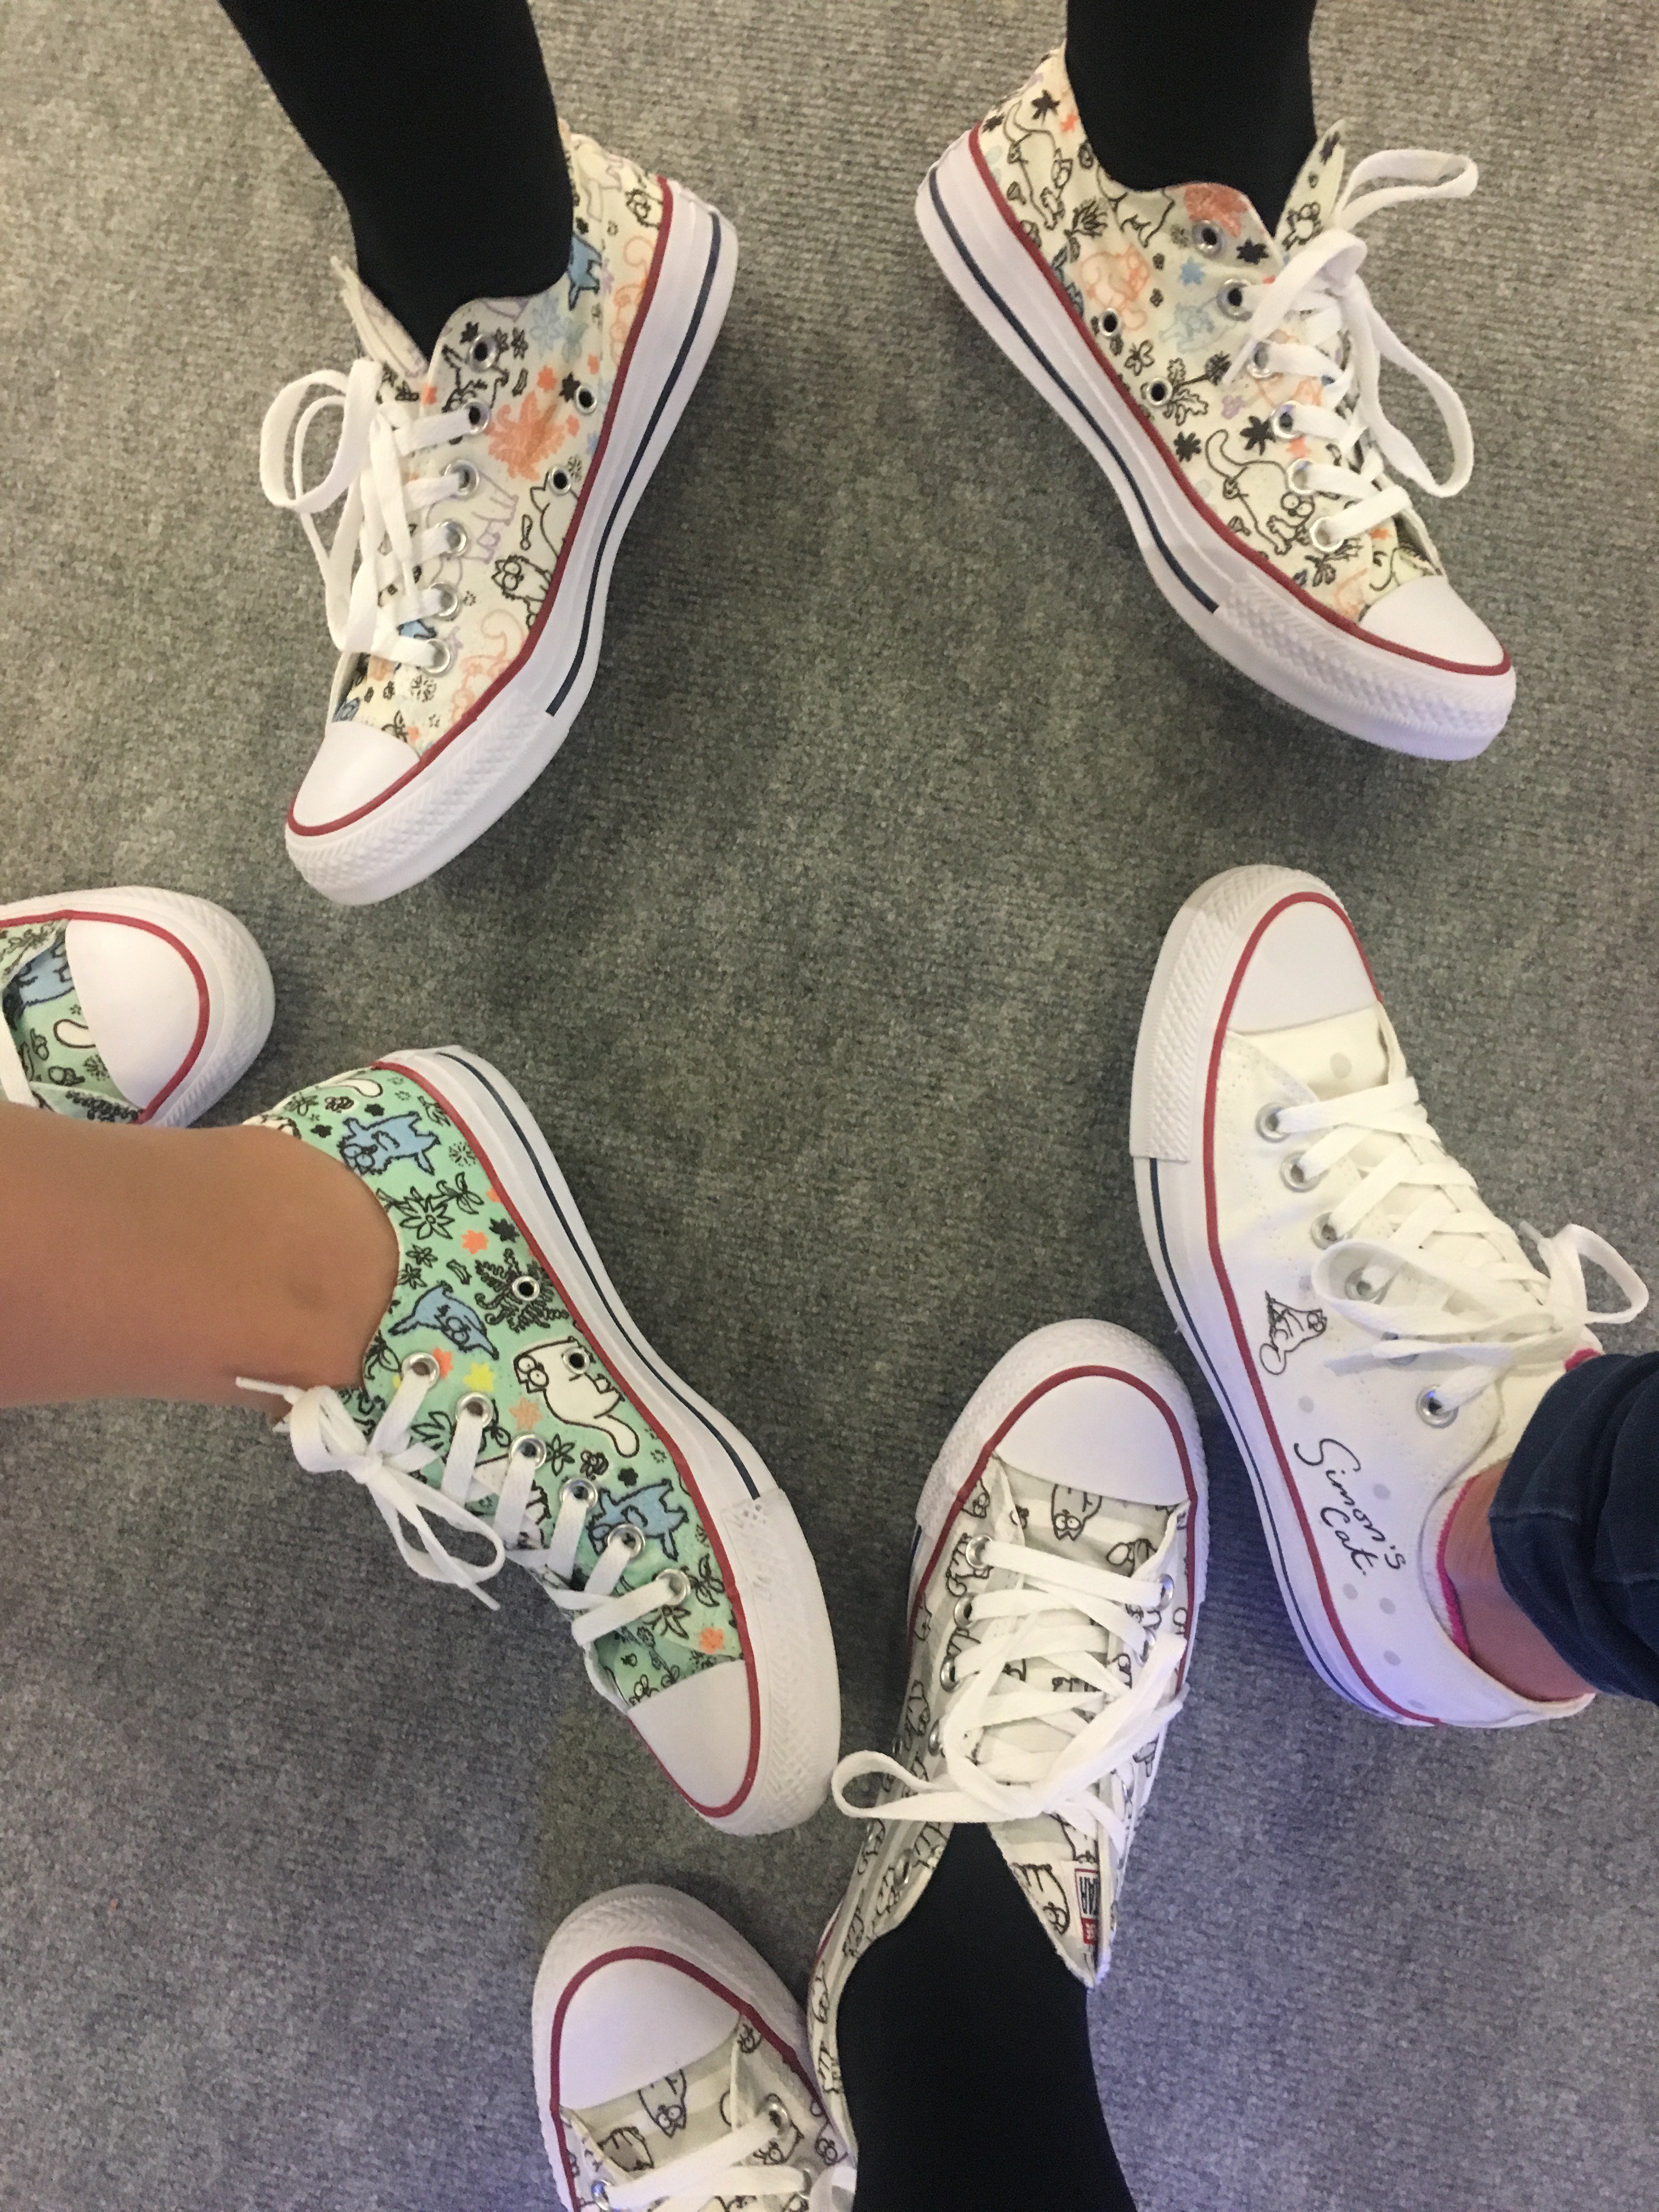 Simon's Cat 🐾 Twitter: "Great NEWS! The Simon's Cat &amp; CONVERSE collaboration is HERE: https://t.co/BONOA6kSA8 👟😺😍 What's your favorite design? https://t.co/0yma8HxhGh" / Twitter